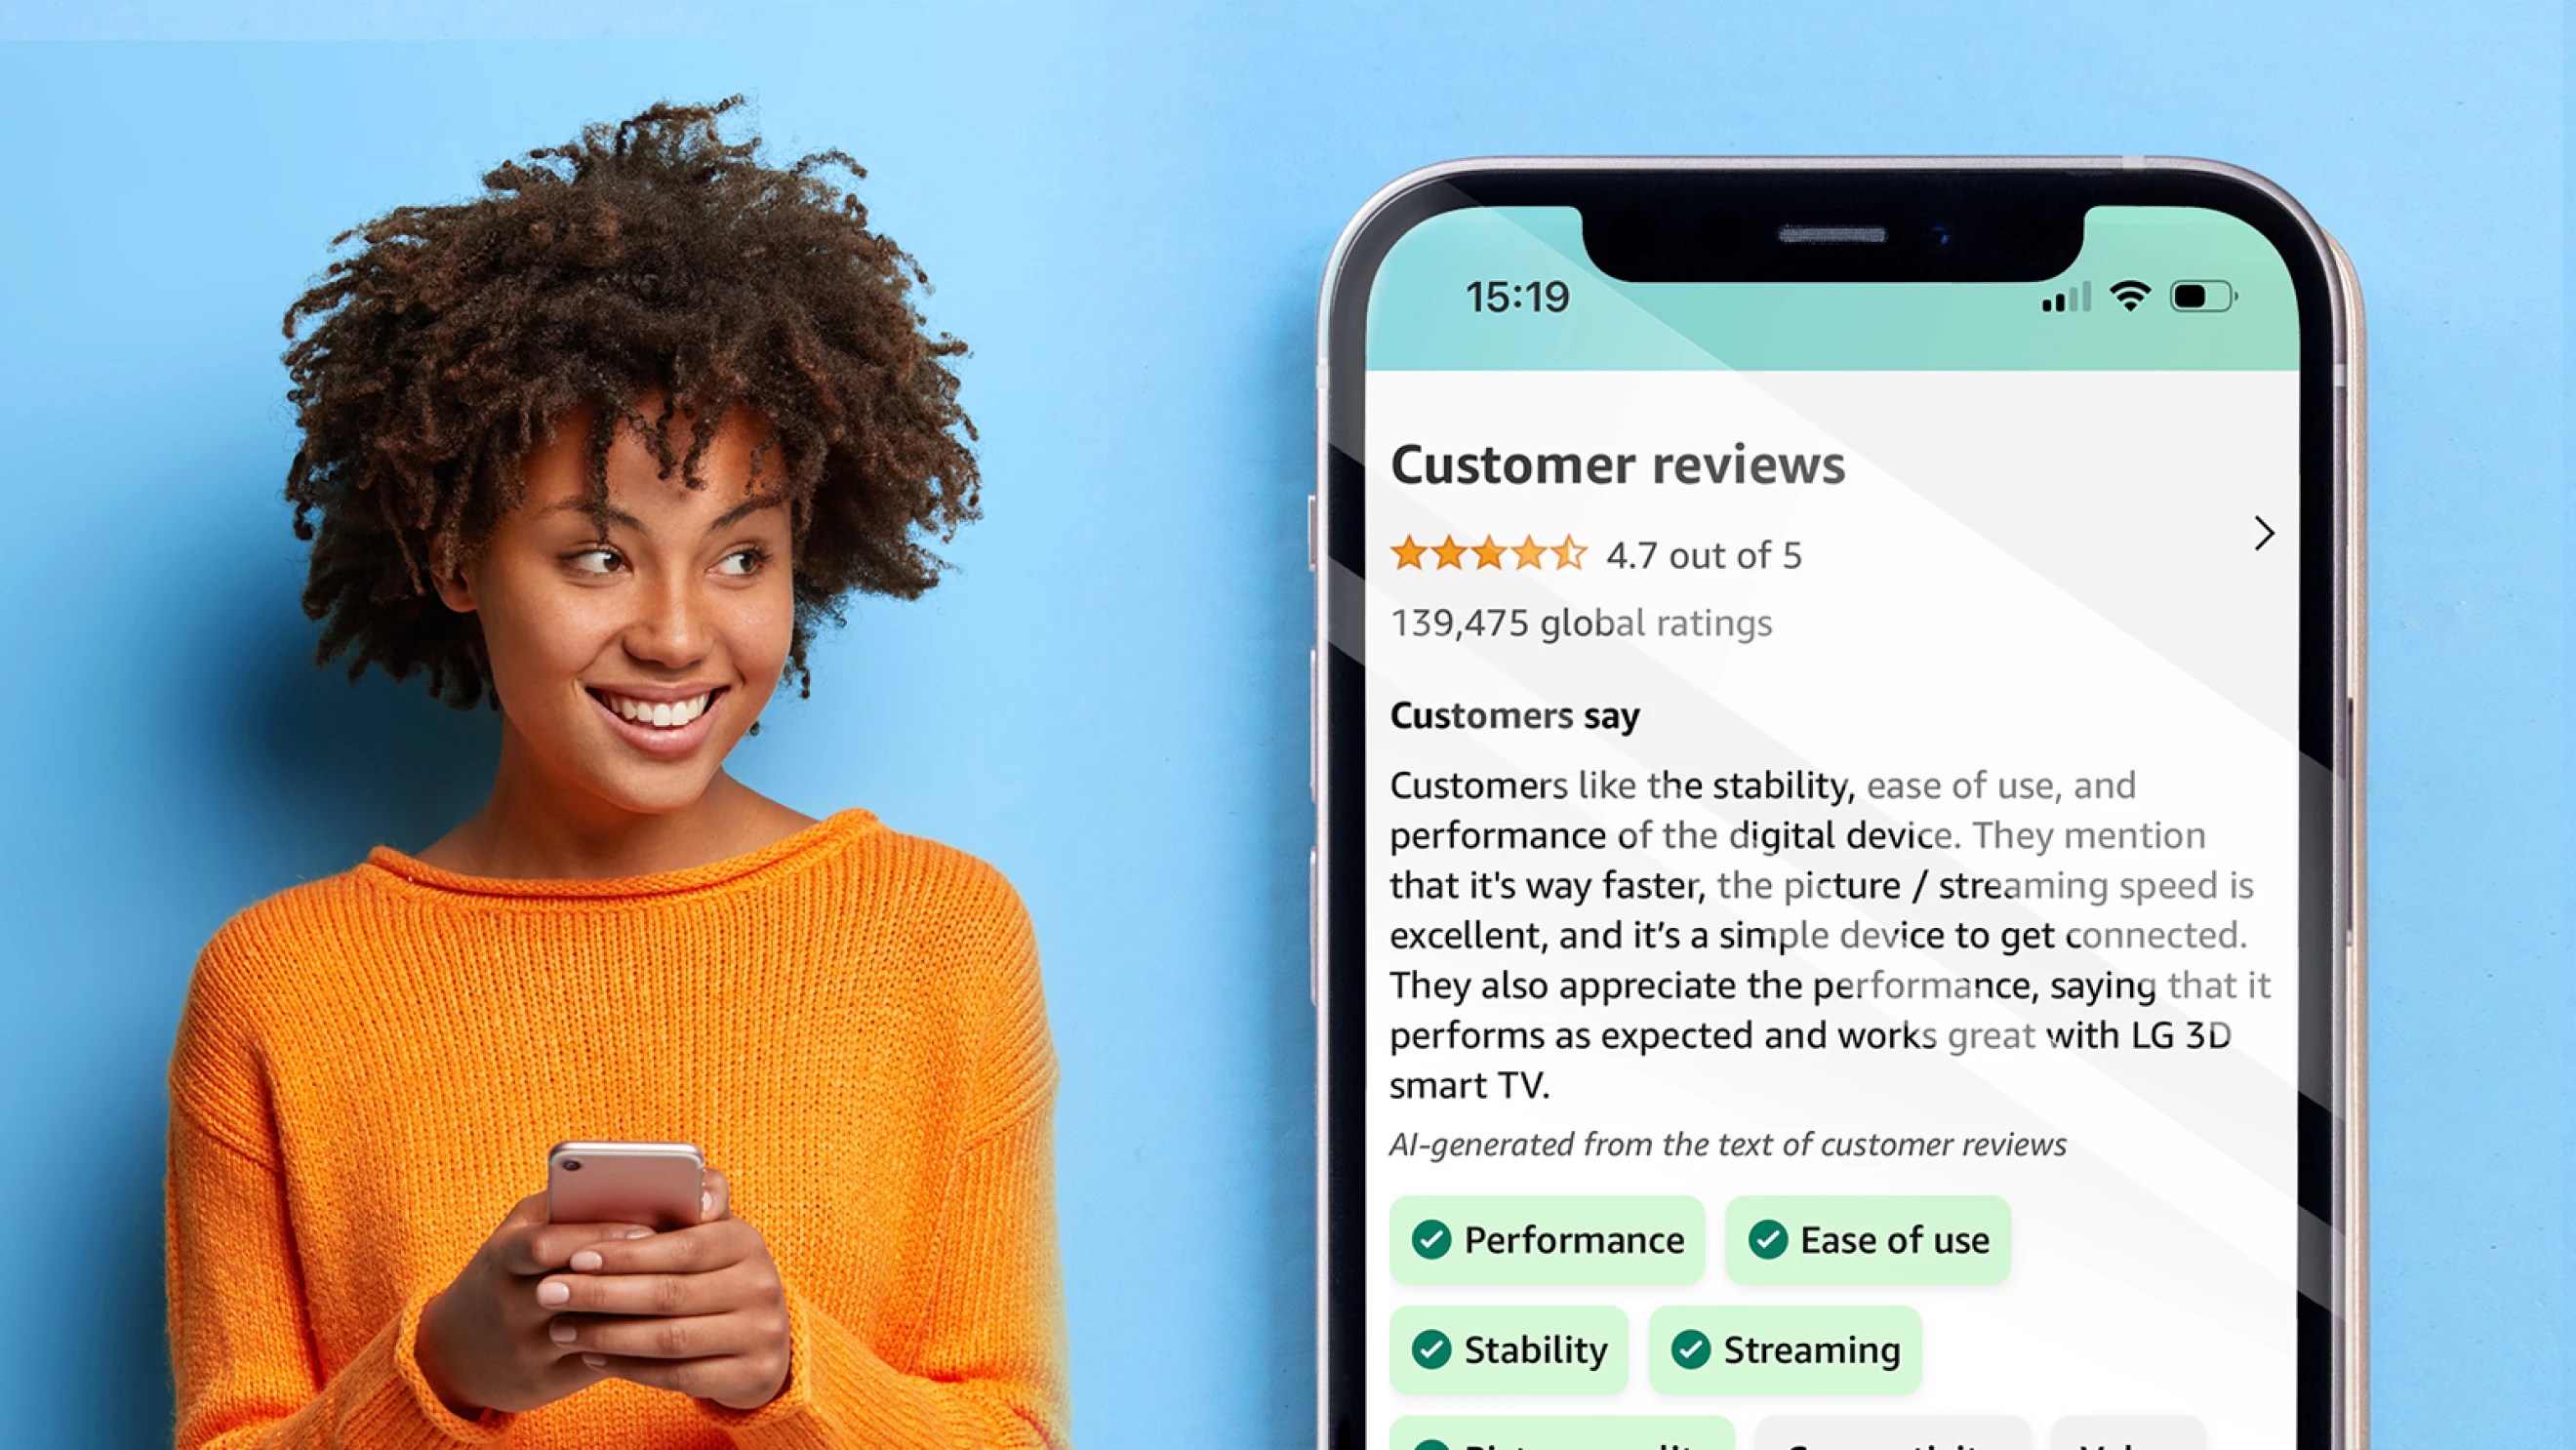 This week in AI: Amazon 'enhances' reviews with AI while Snap's goes rogue 1